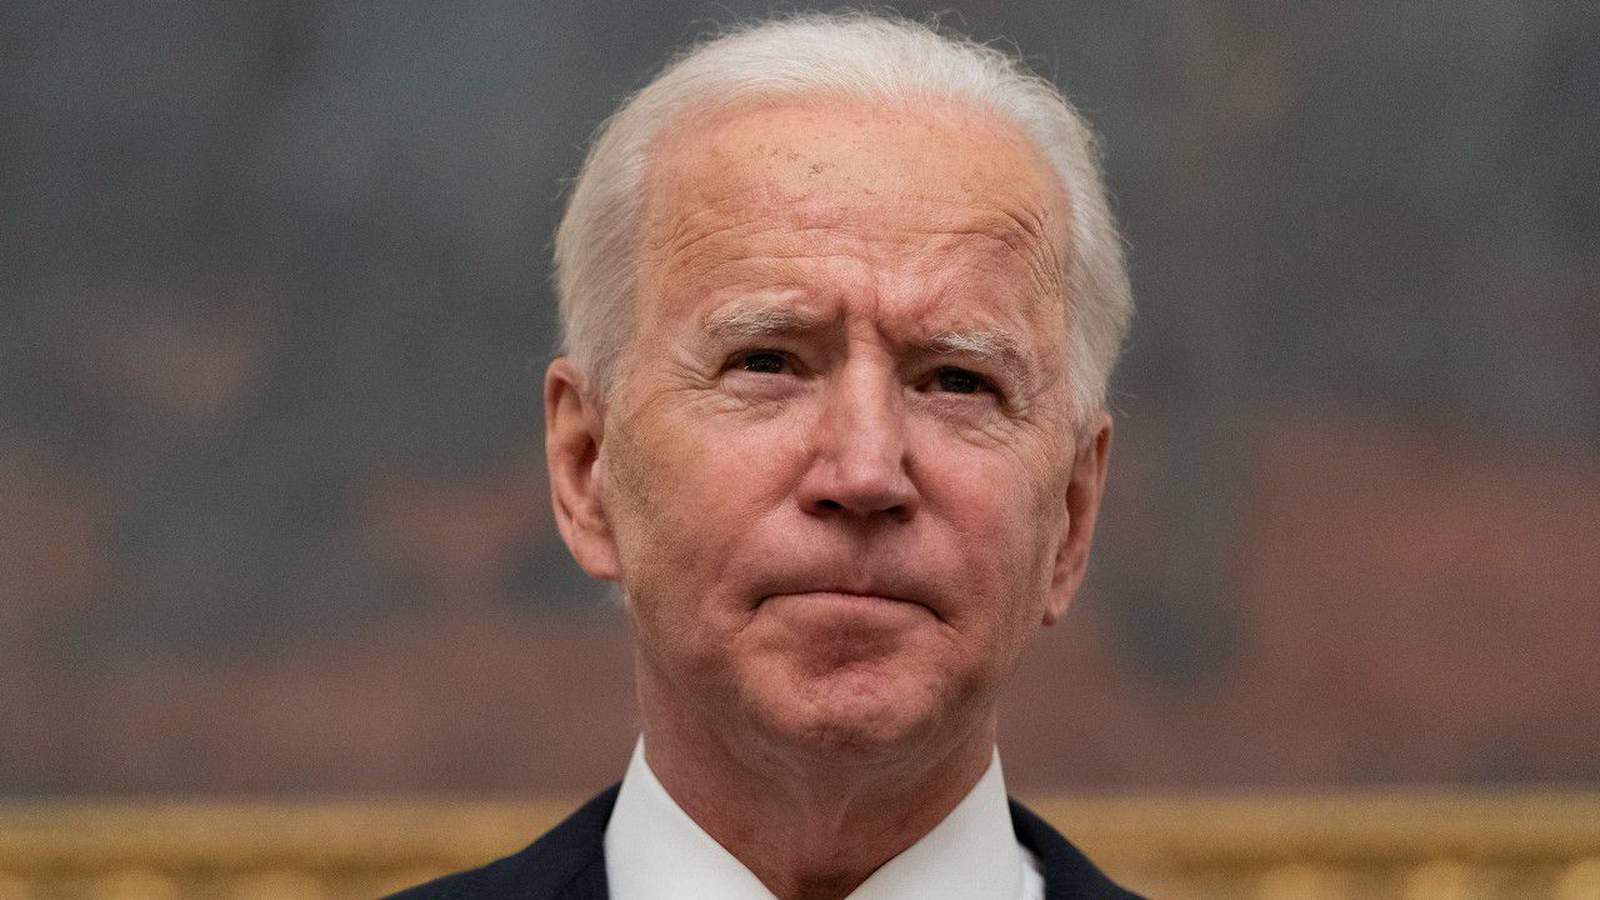 WATCH LIVE: President Biden to sign order for govt to buy more US goods